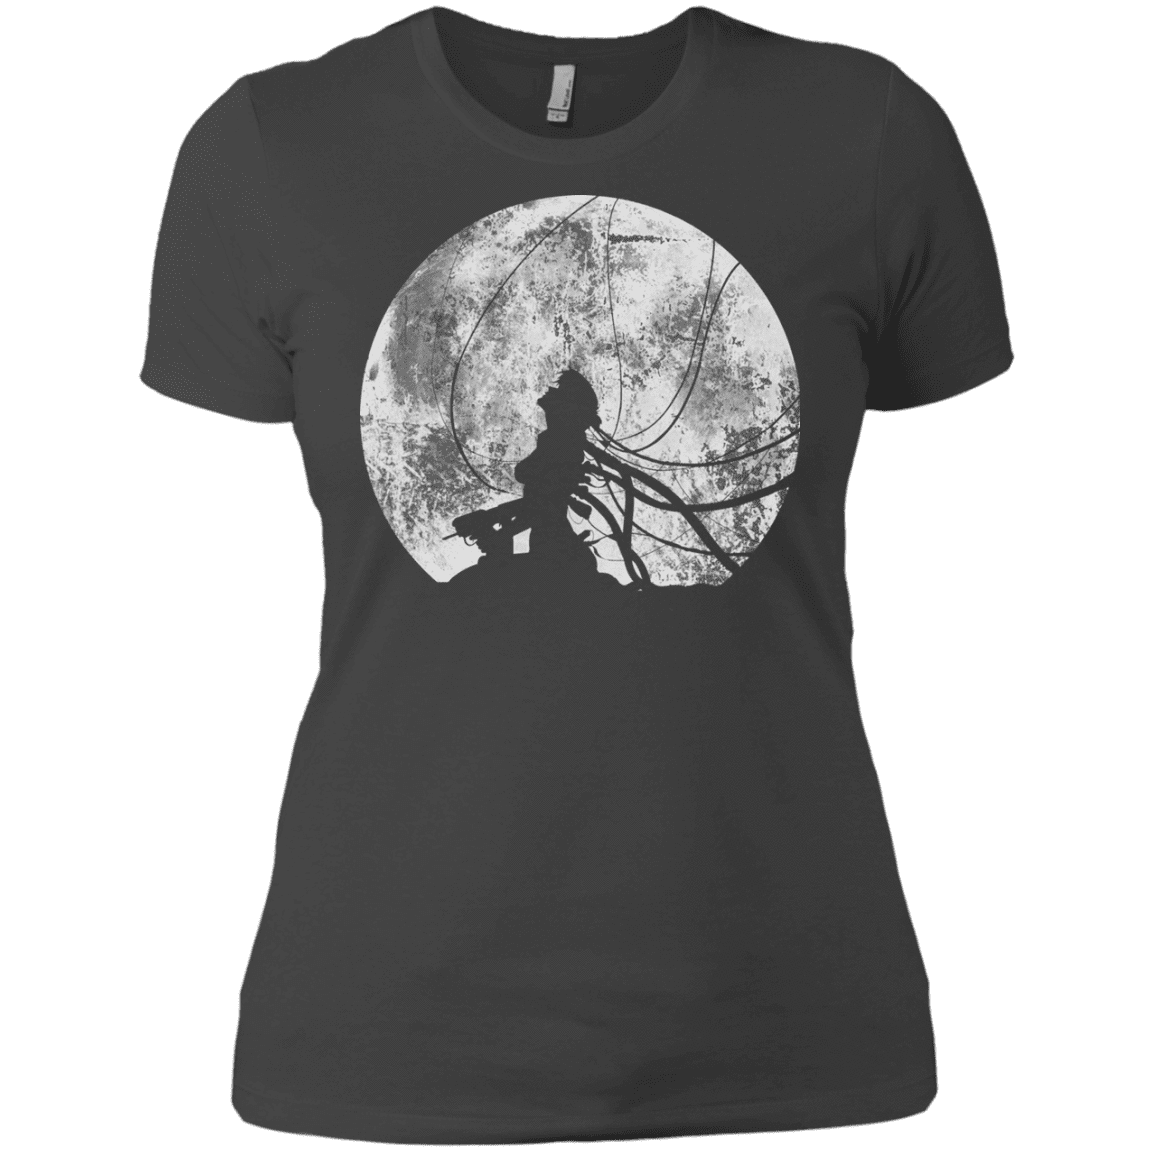 T-Shirts Heavy Metal / X-Small Shell of a Ghost Women's Premium T-Shirt